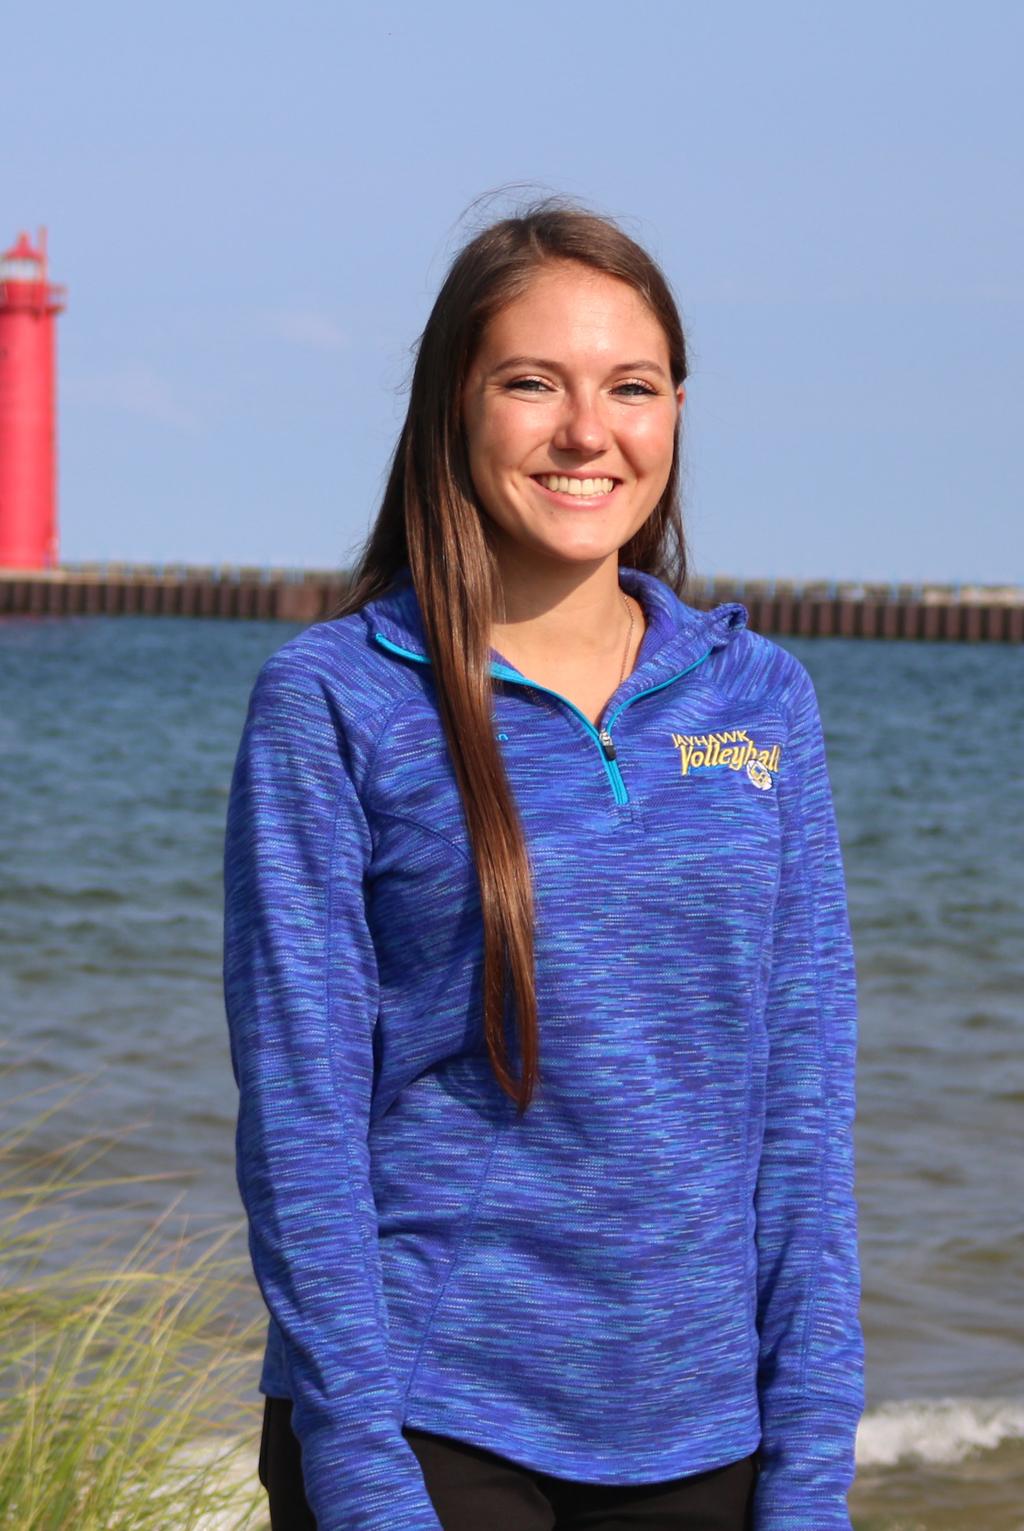 Women s Volleyball Assistant Coach Brooke Day will return to M.C.C. as an assistant coach on the Jayhawk Volleyball staff after competing for the Jayhawks in 2015 and 2016. While at M.C.C. Brooke competed as a defensive specialist and helped the 2015 team to a Regional Championship and an appearance at the NJCAA DII National Championship.